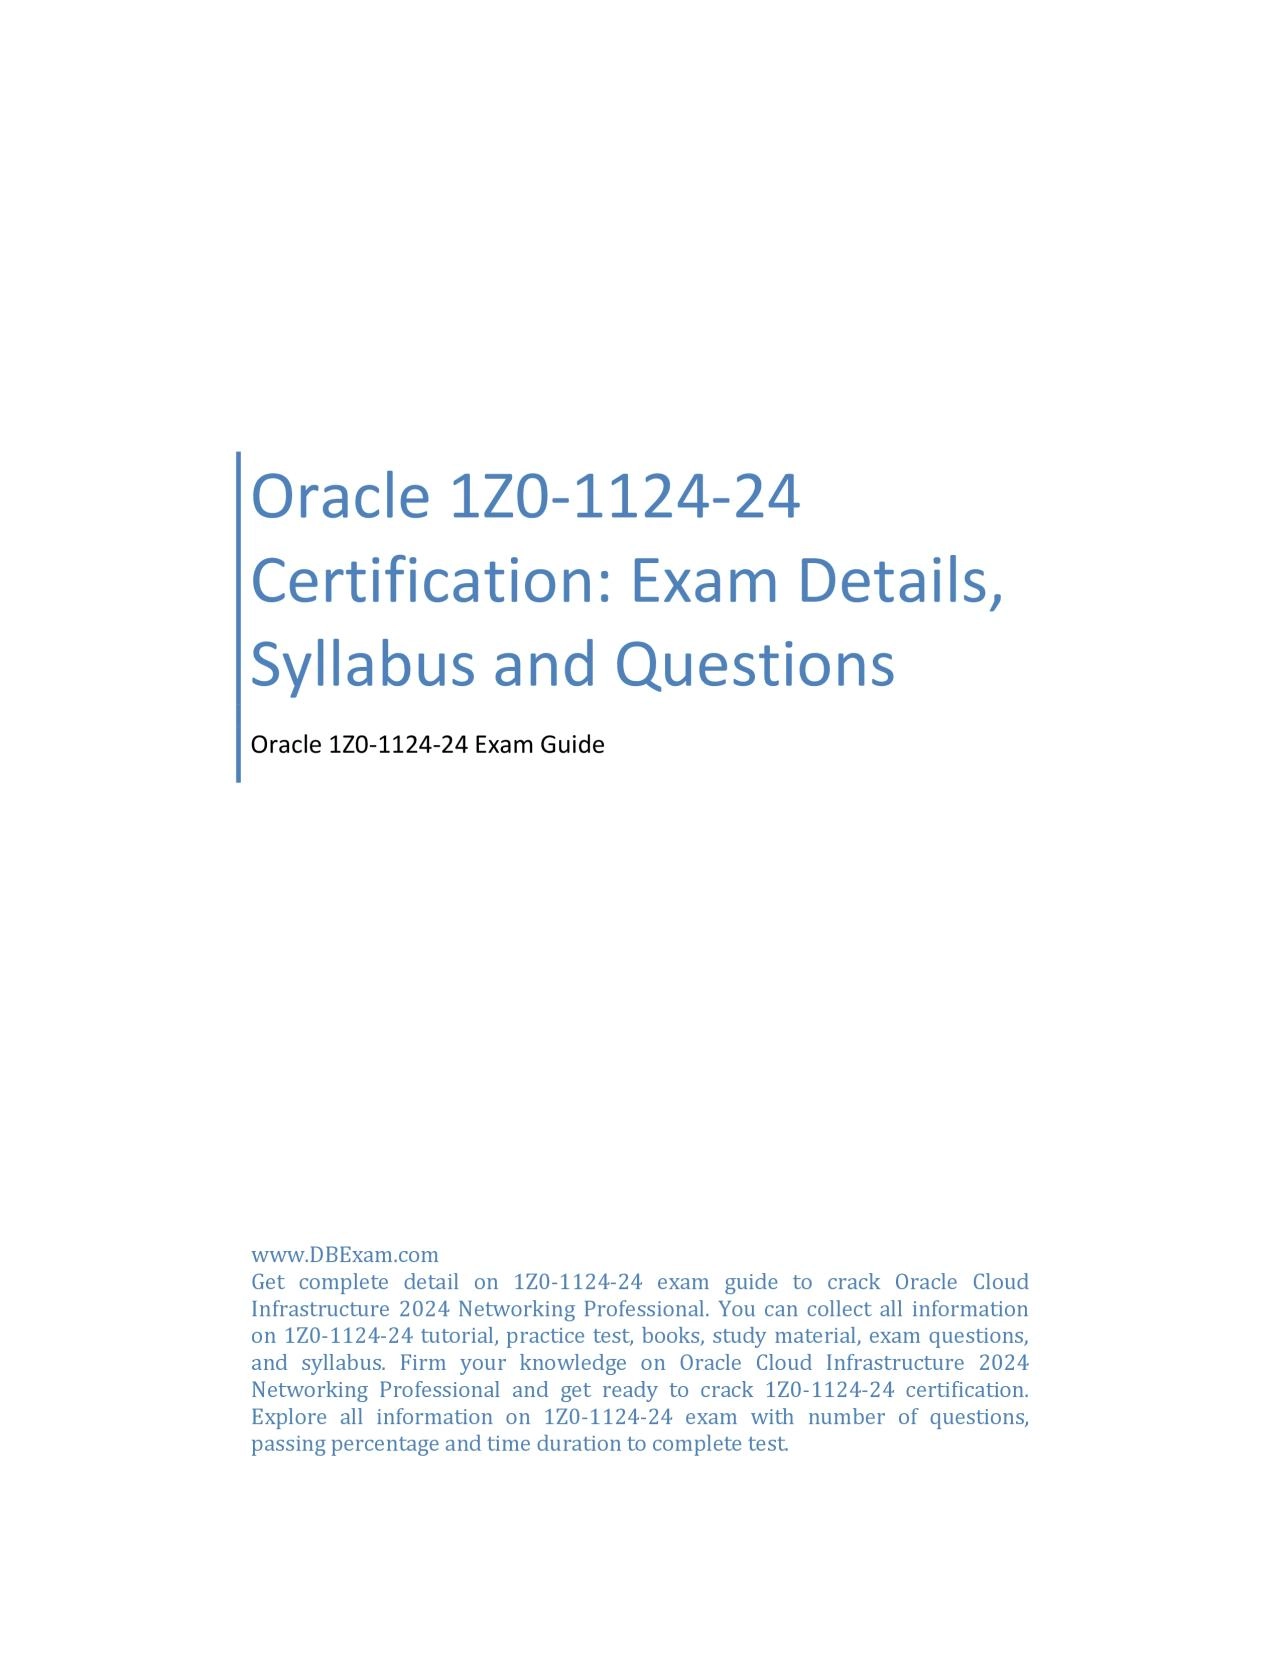 Oracle 1Z0-1124-24 Certification: Exam Details, Syllabus and Questions